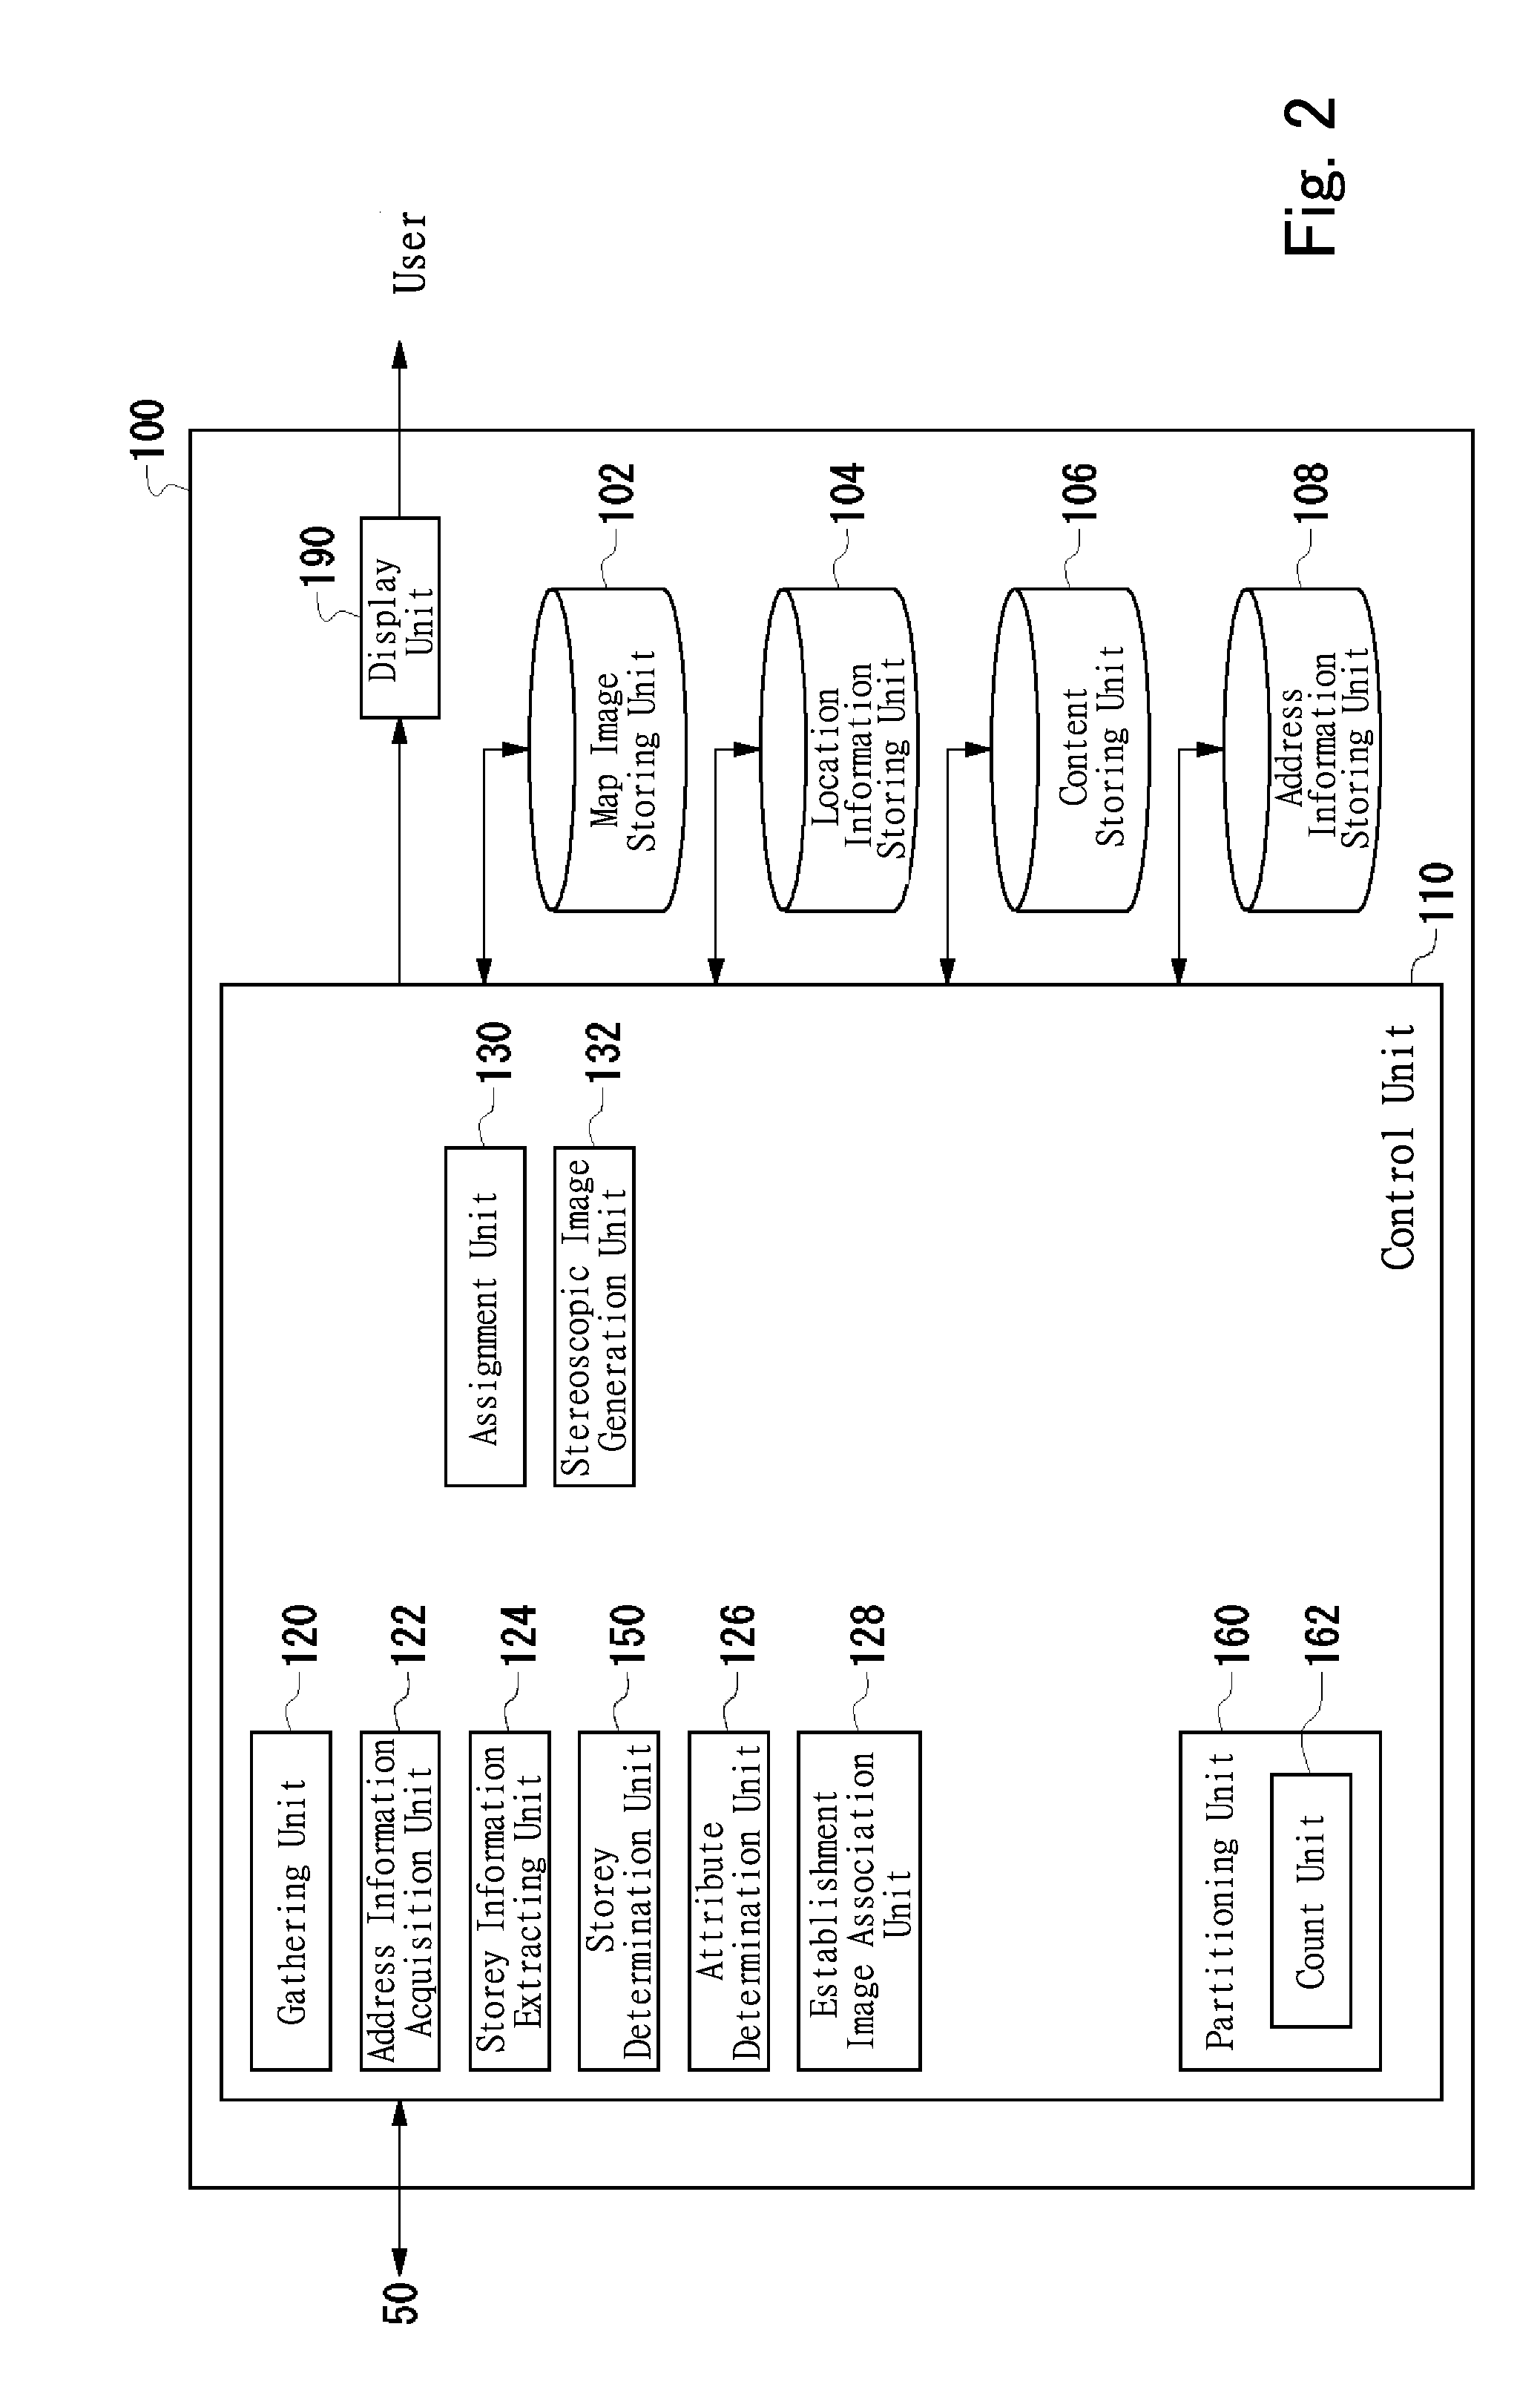 Method and Server Computer For Generating Map Images For Creating Virtual Spaces Representing The Real World